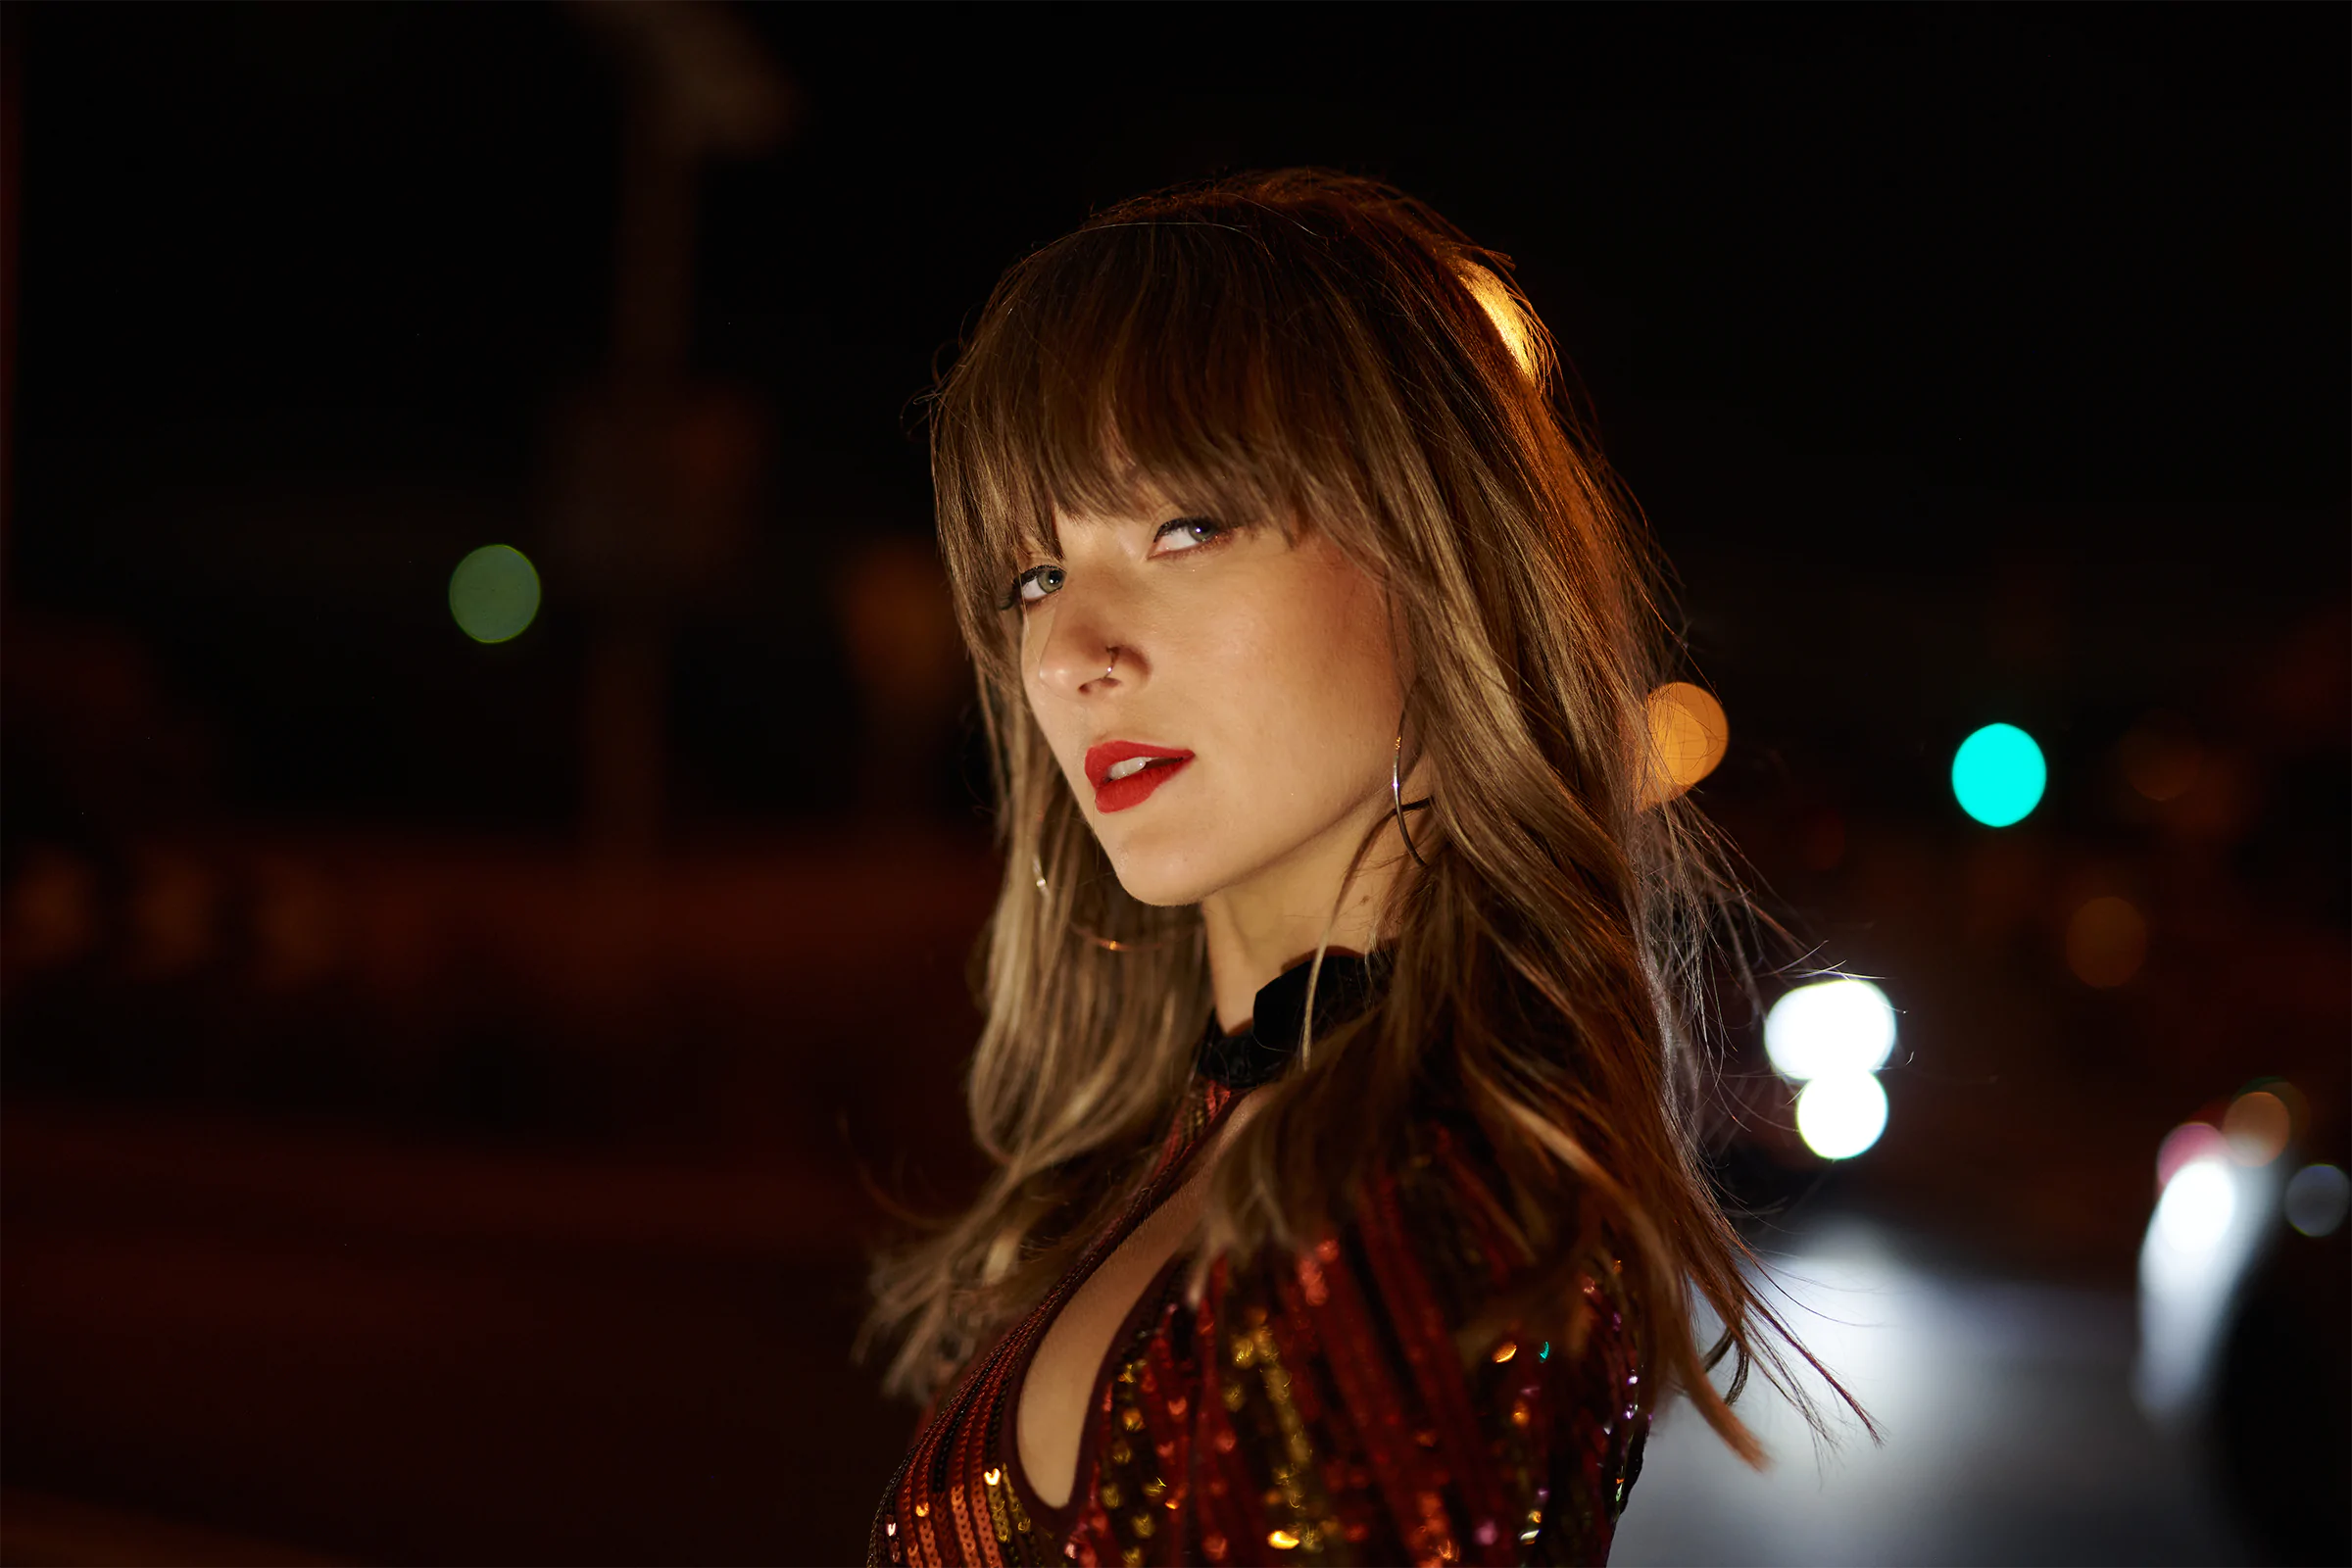 GRETTA RAY announces the release of her debut album – ‘Begin to Look Around’